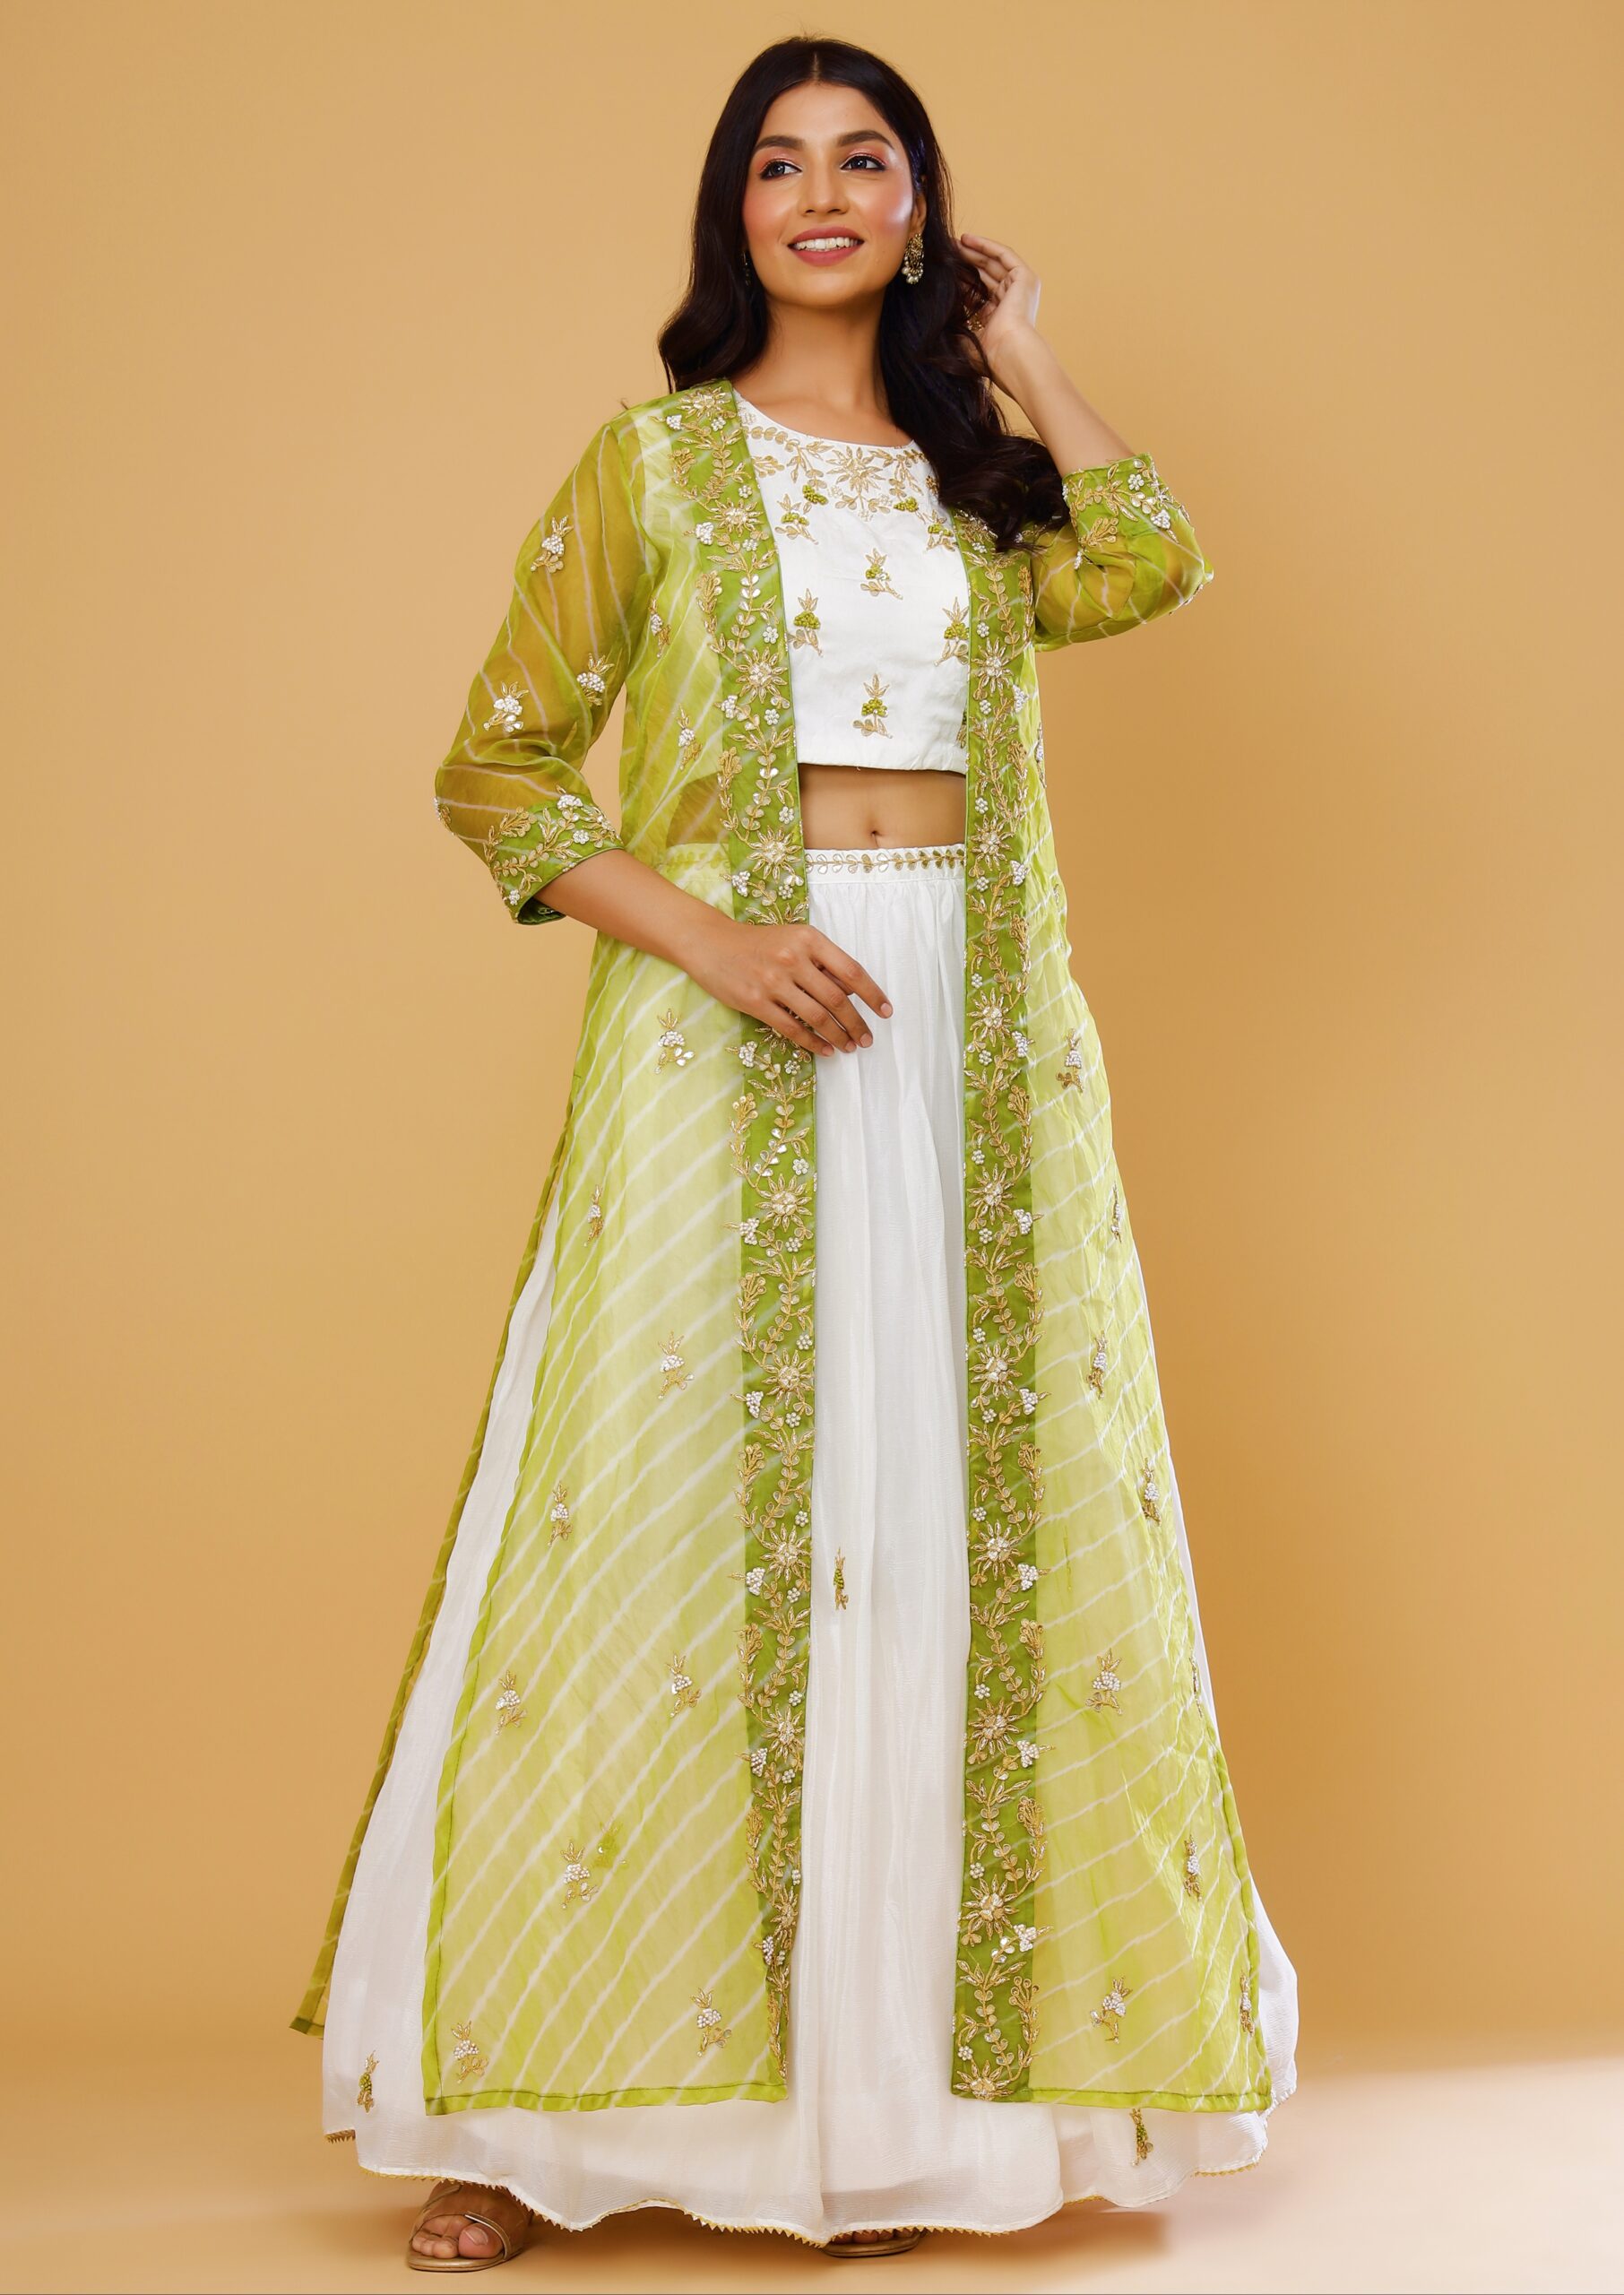 Beautiful Jacket with top and skirt | Dress indian style, Stylish dress  designs, Indian fashion